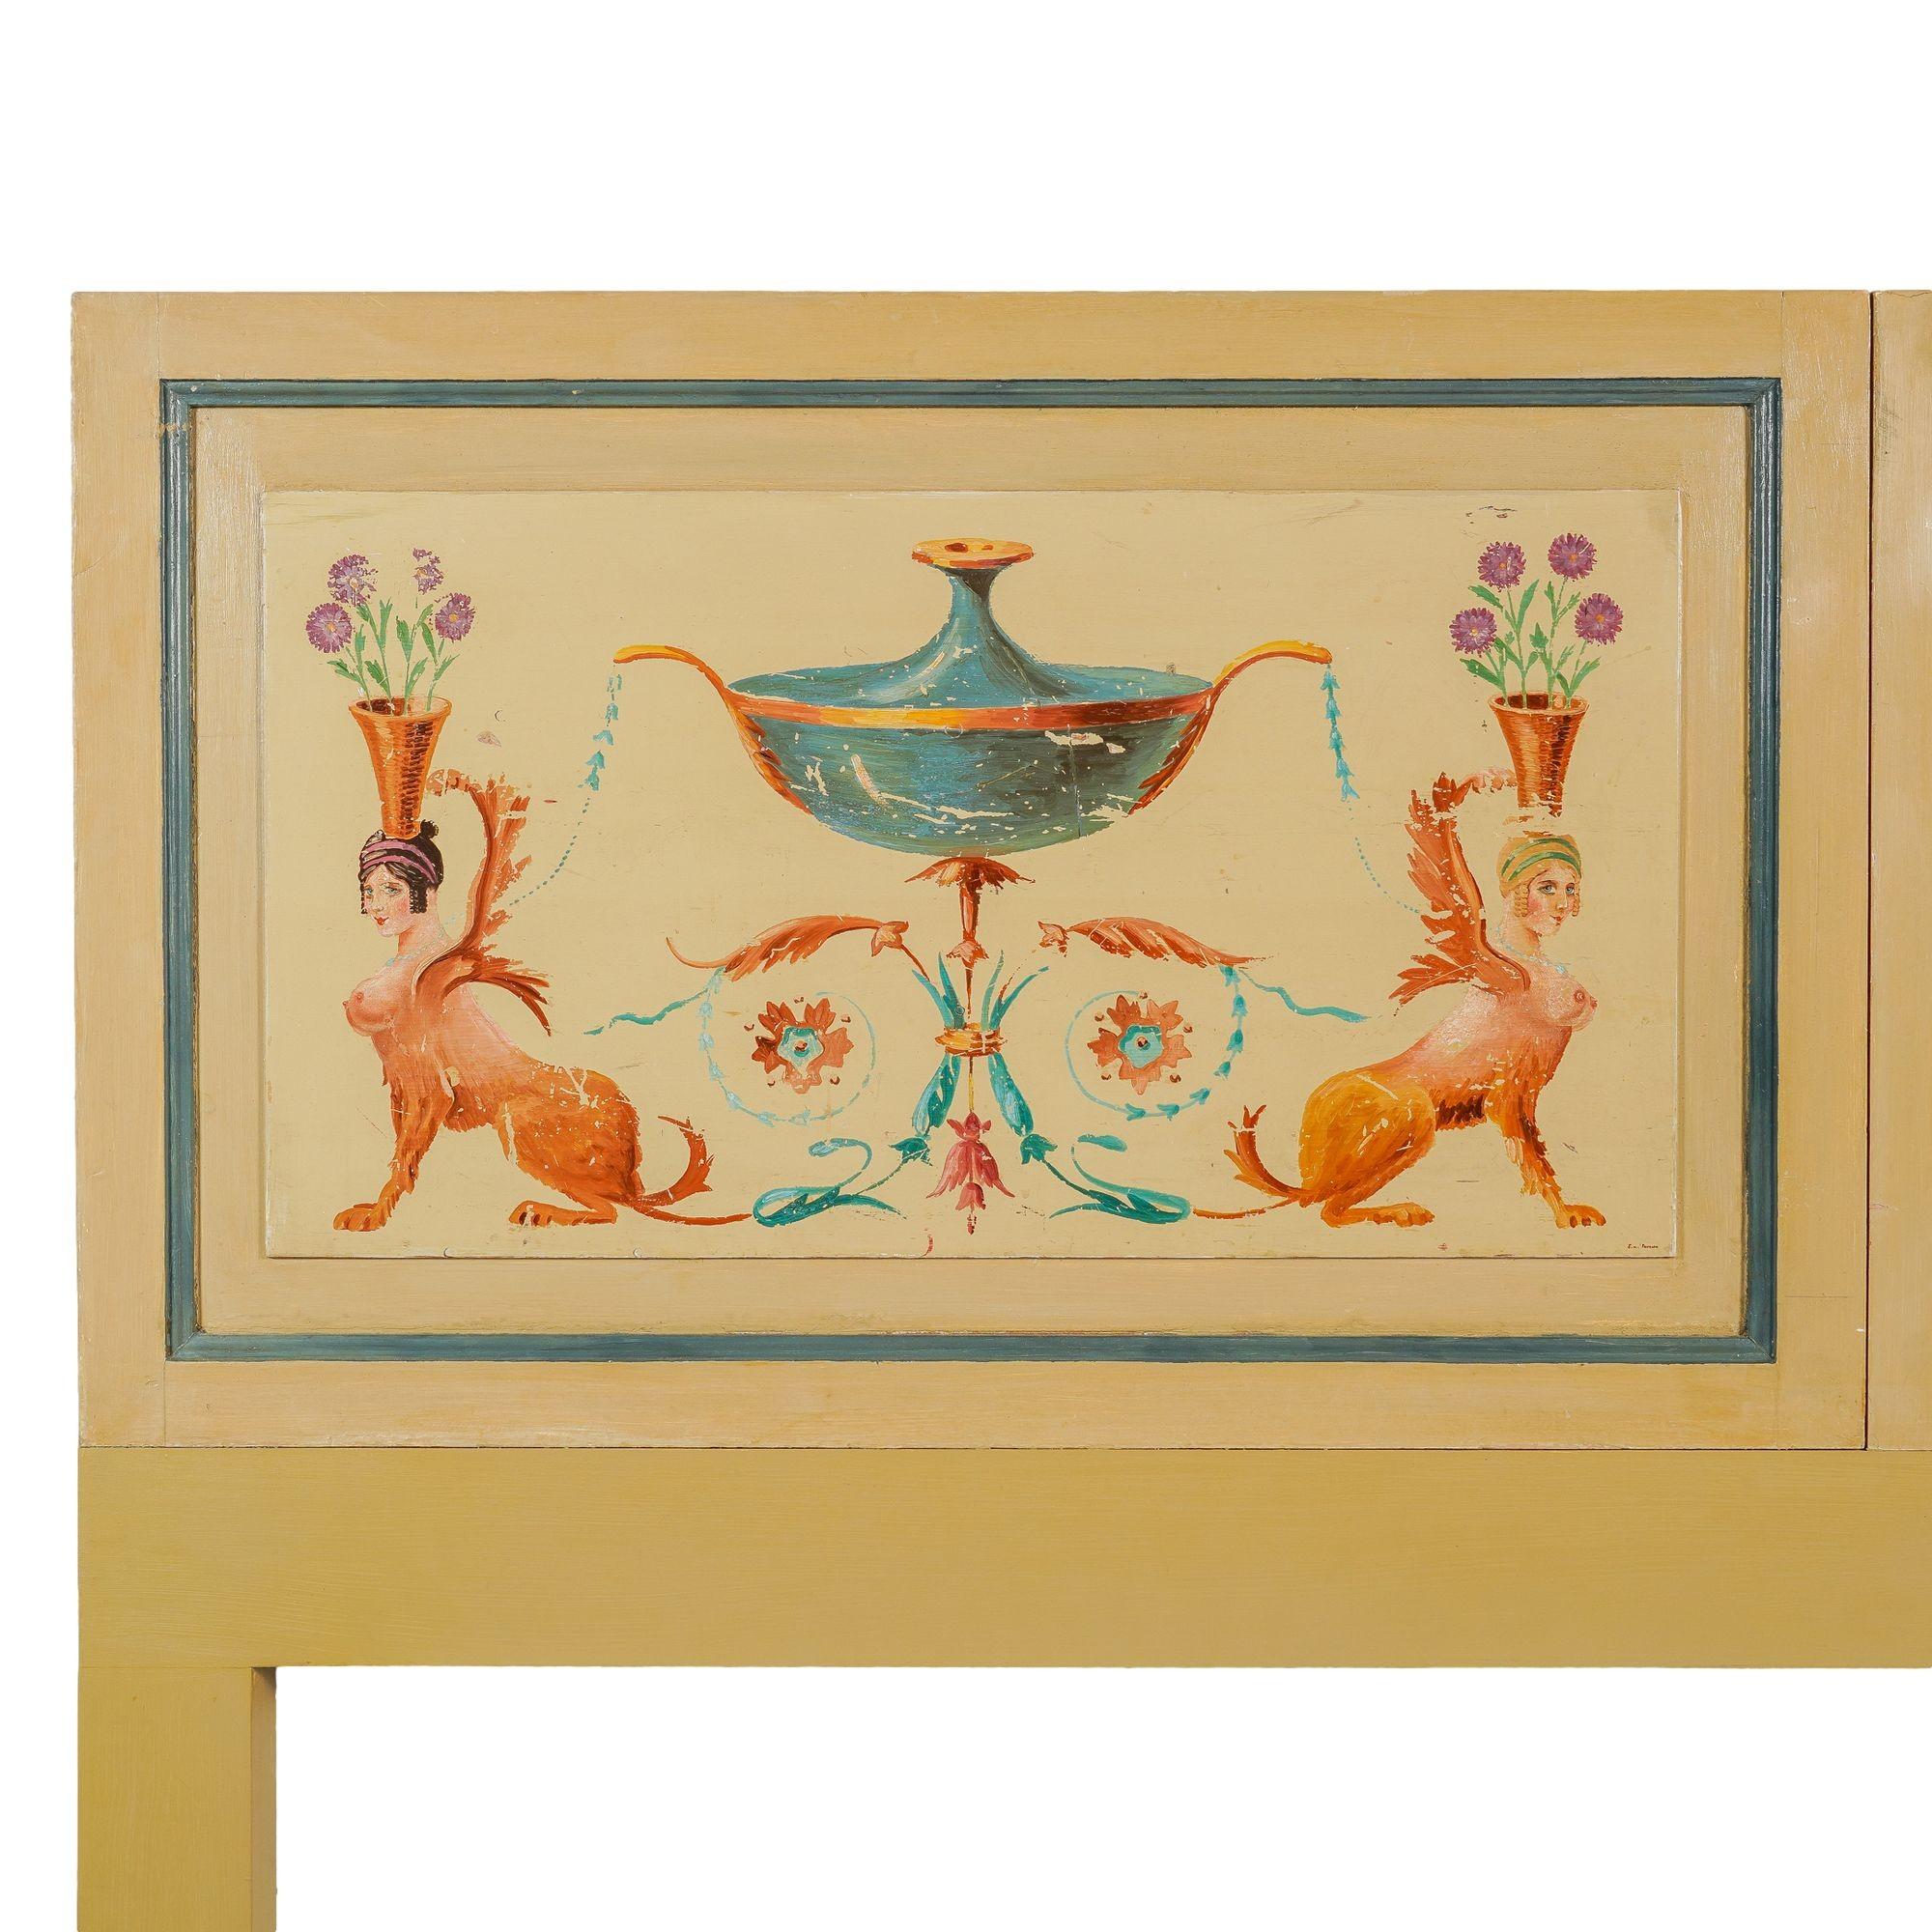 Pair of architectural feather edge panels painted in the Pompeiian taste. The panels each feature a pair of mythical creatures which are a hybrid between a griffin and a female centaur. These conceits were part of a suite of decorative architectural